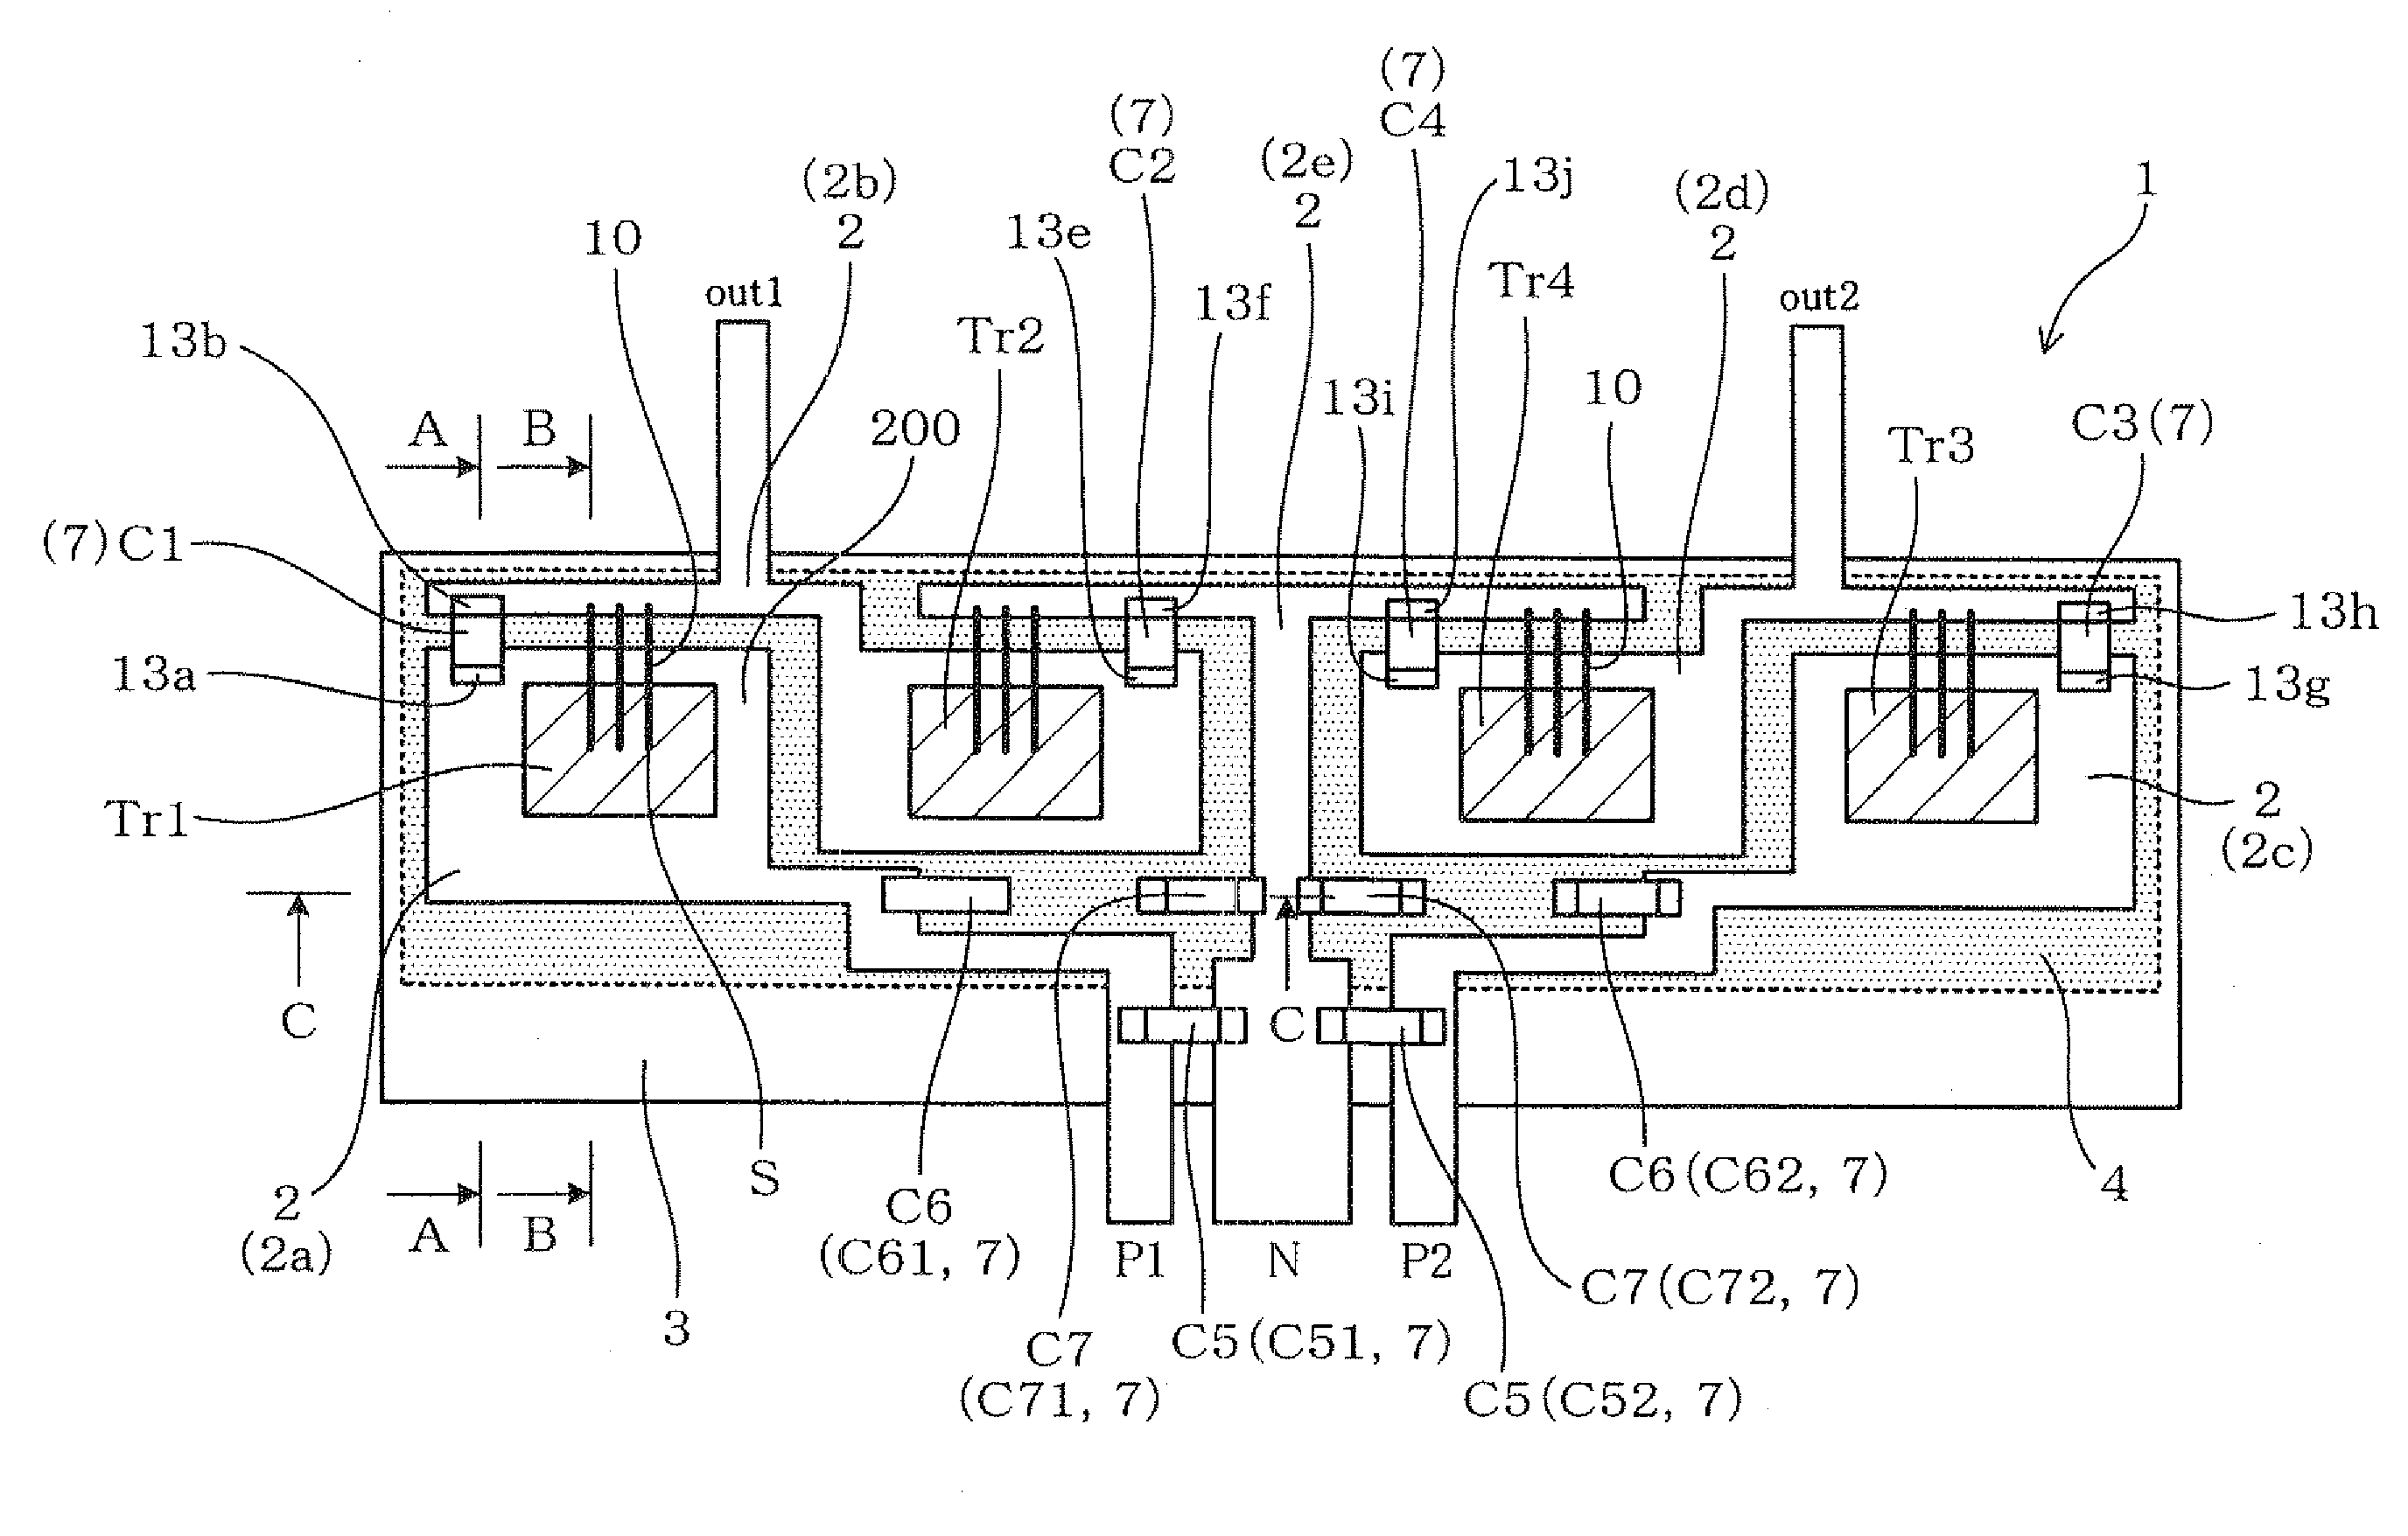 Semiconductor module with electrical switching elements